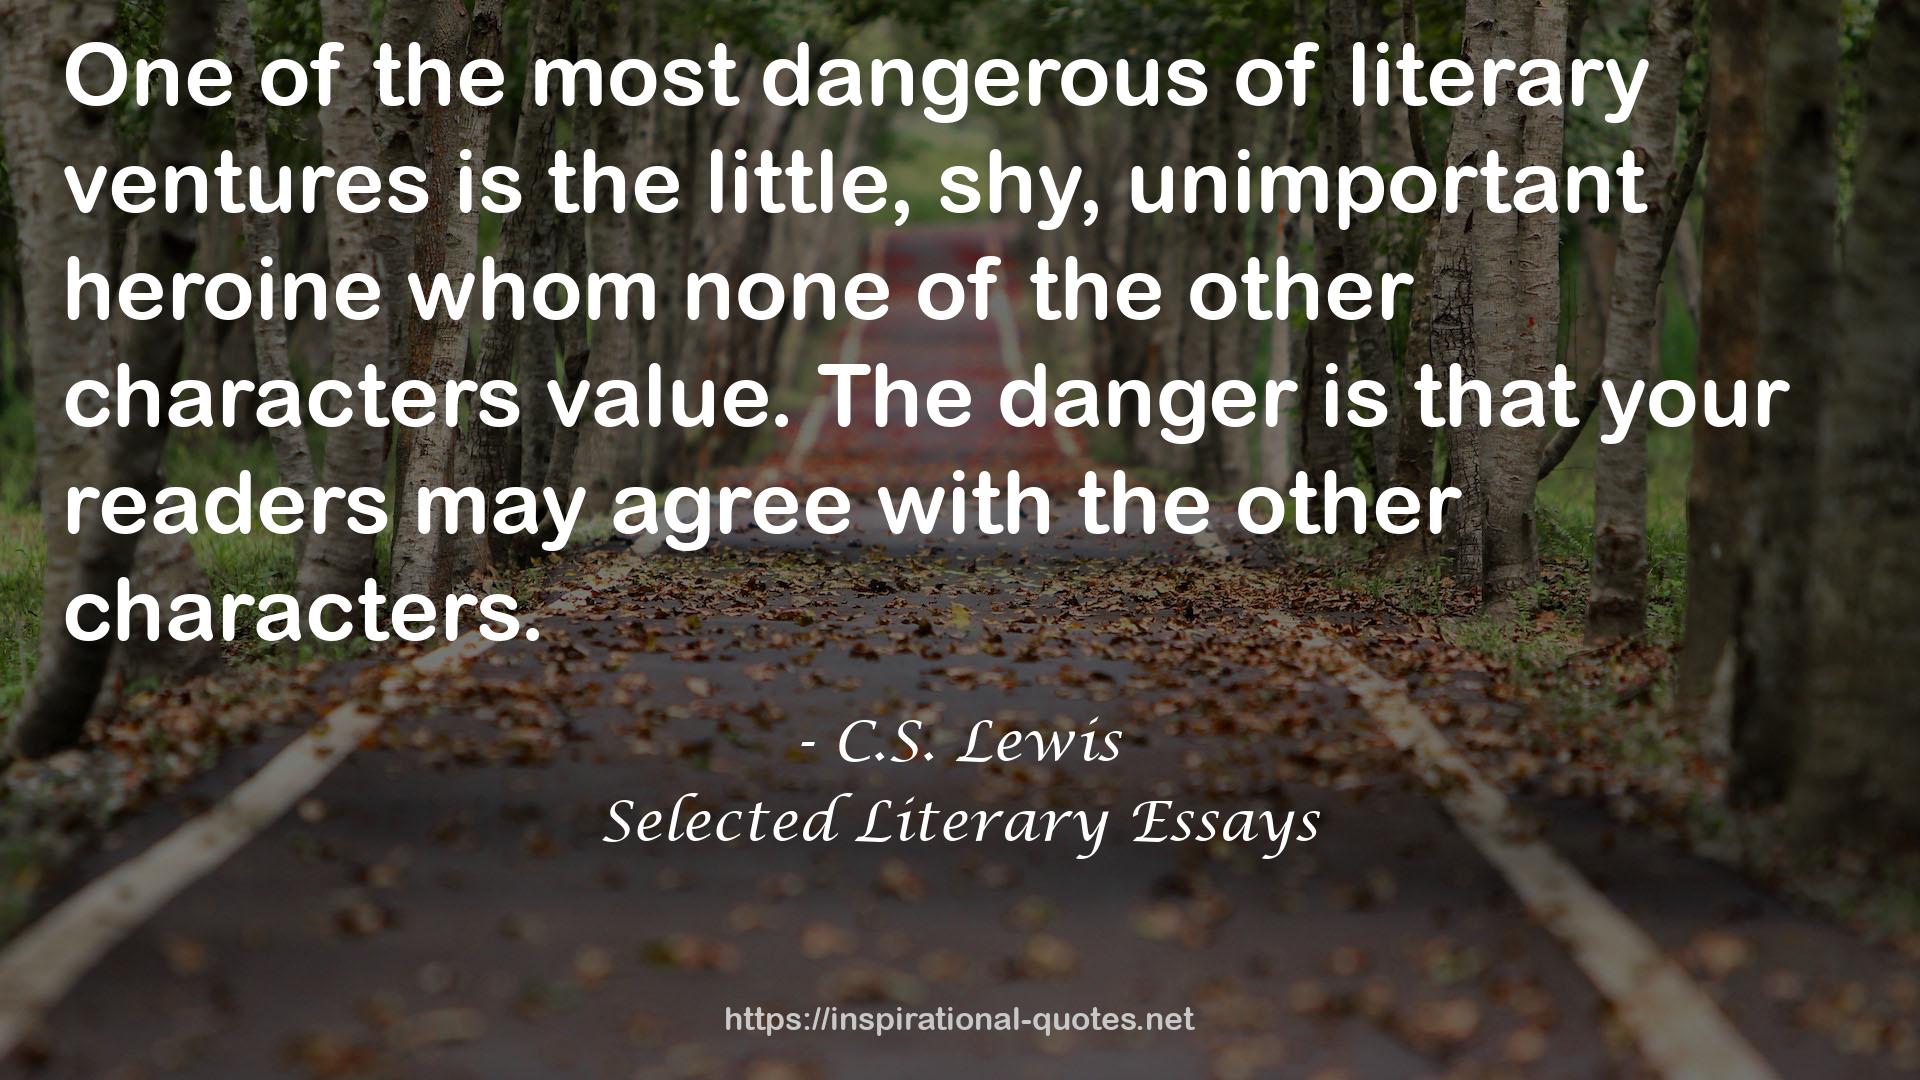 Selected Literary Essays QUOTES